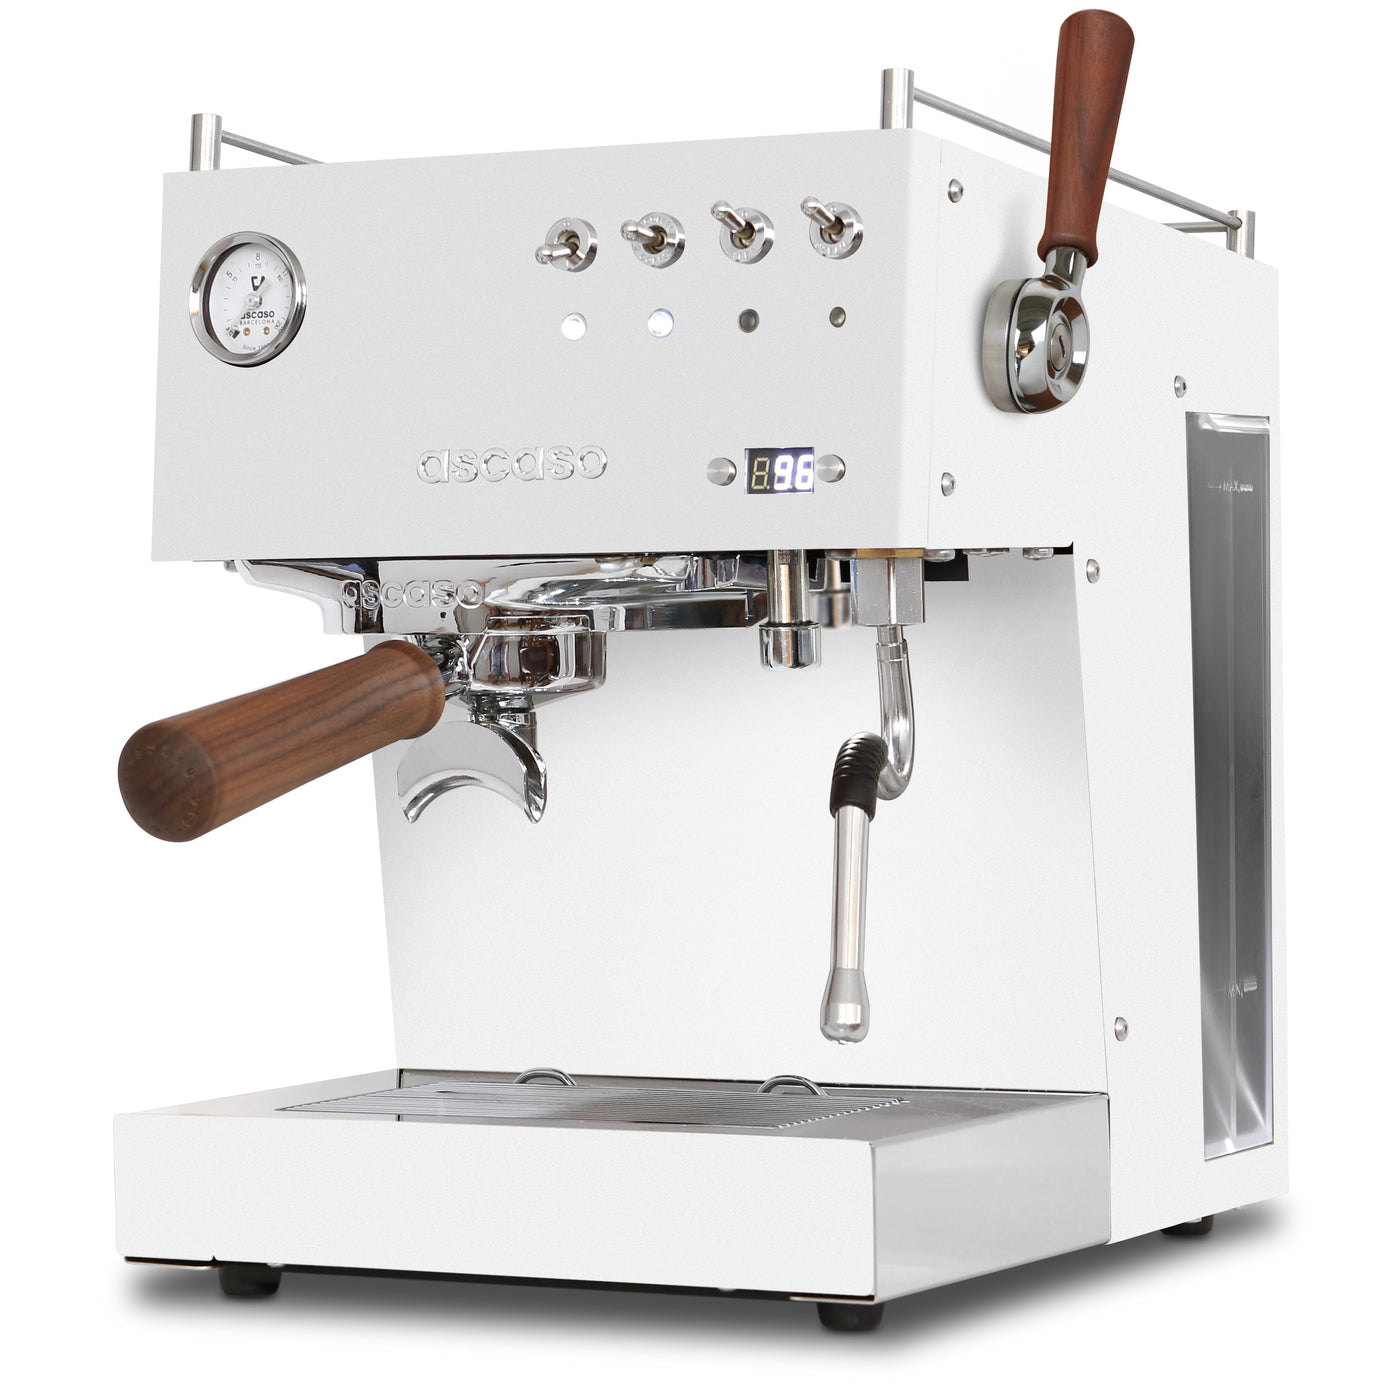 Ascaso Steel Duo Plus in White and Walnut wood - view from the front right corner of the Espresso machine